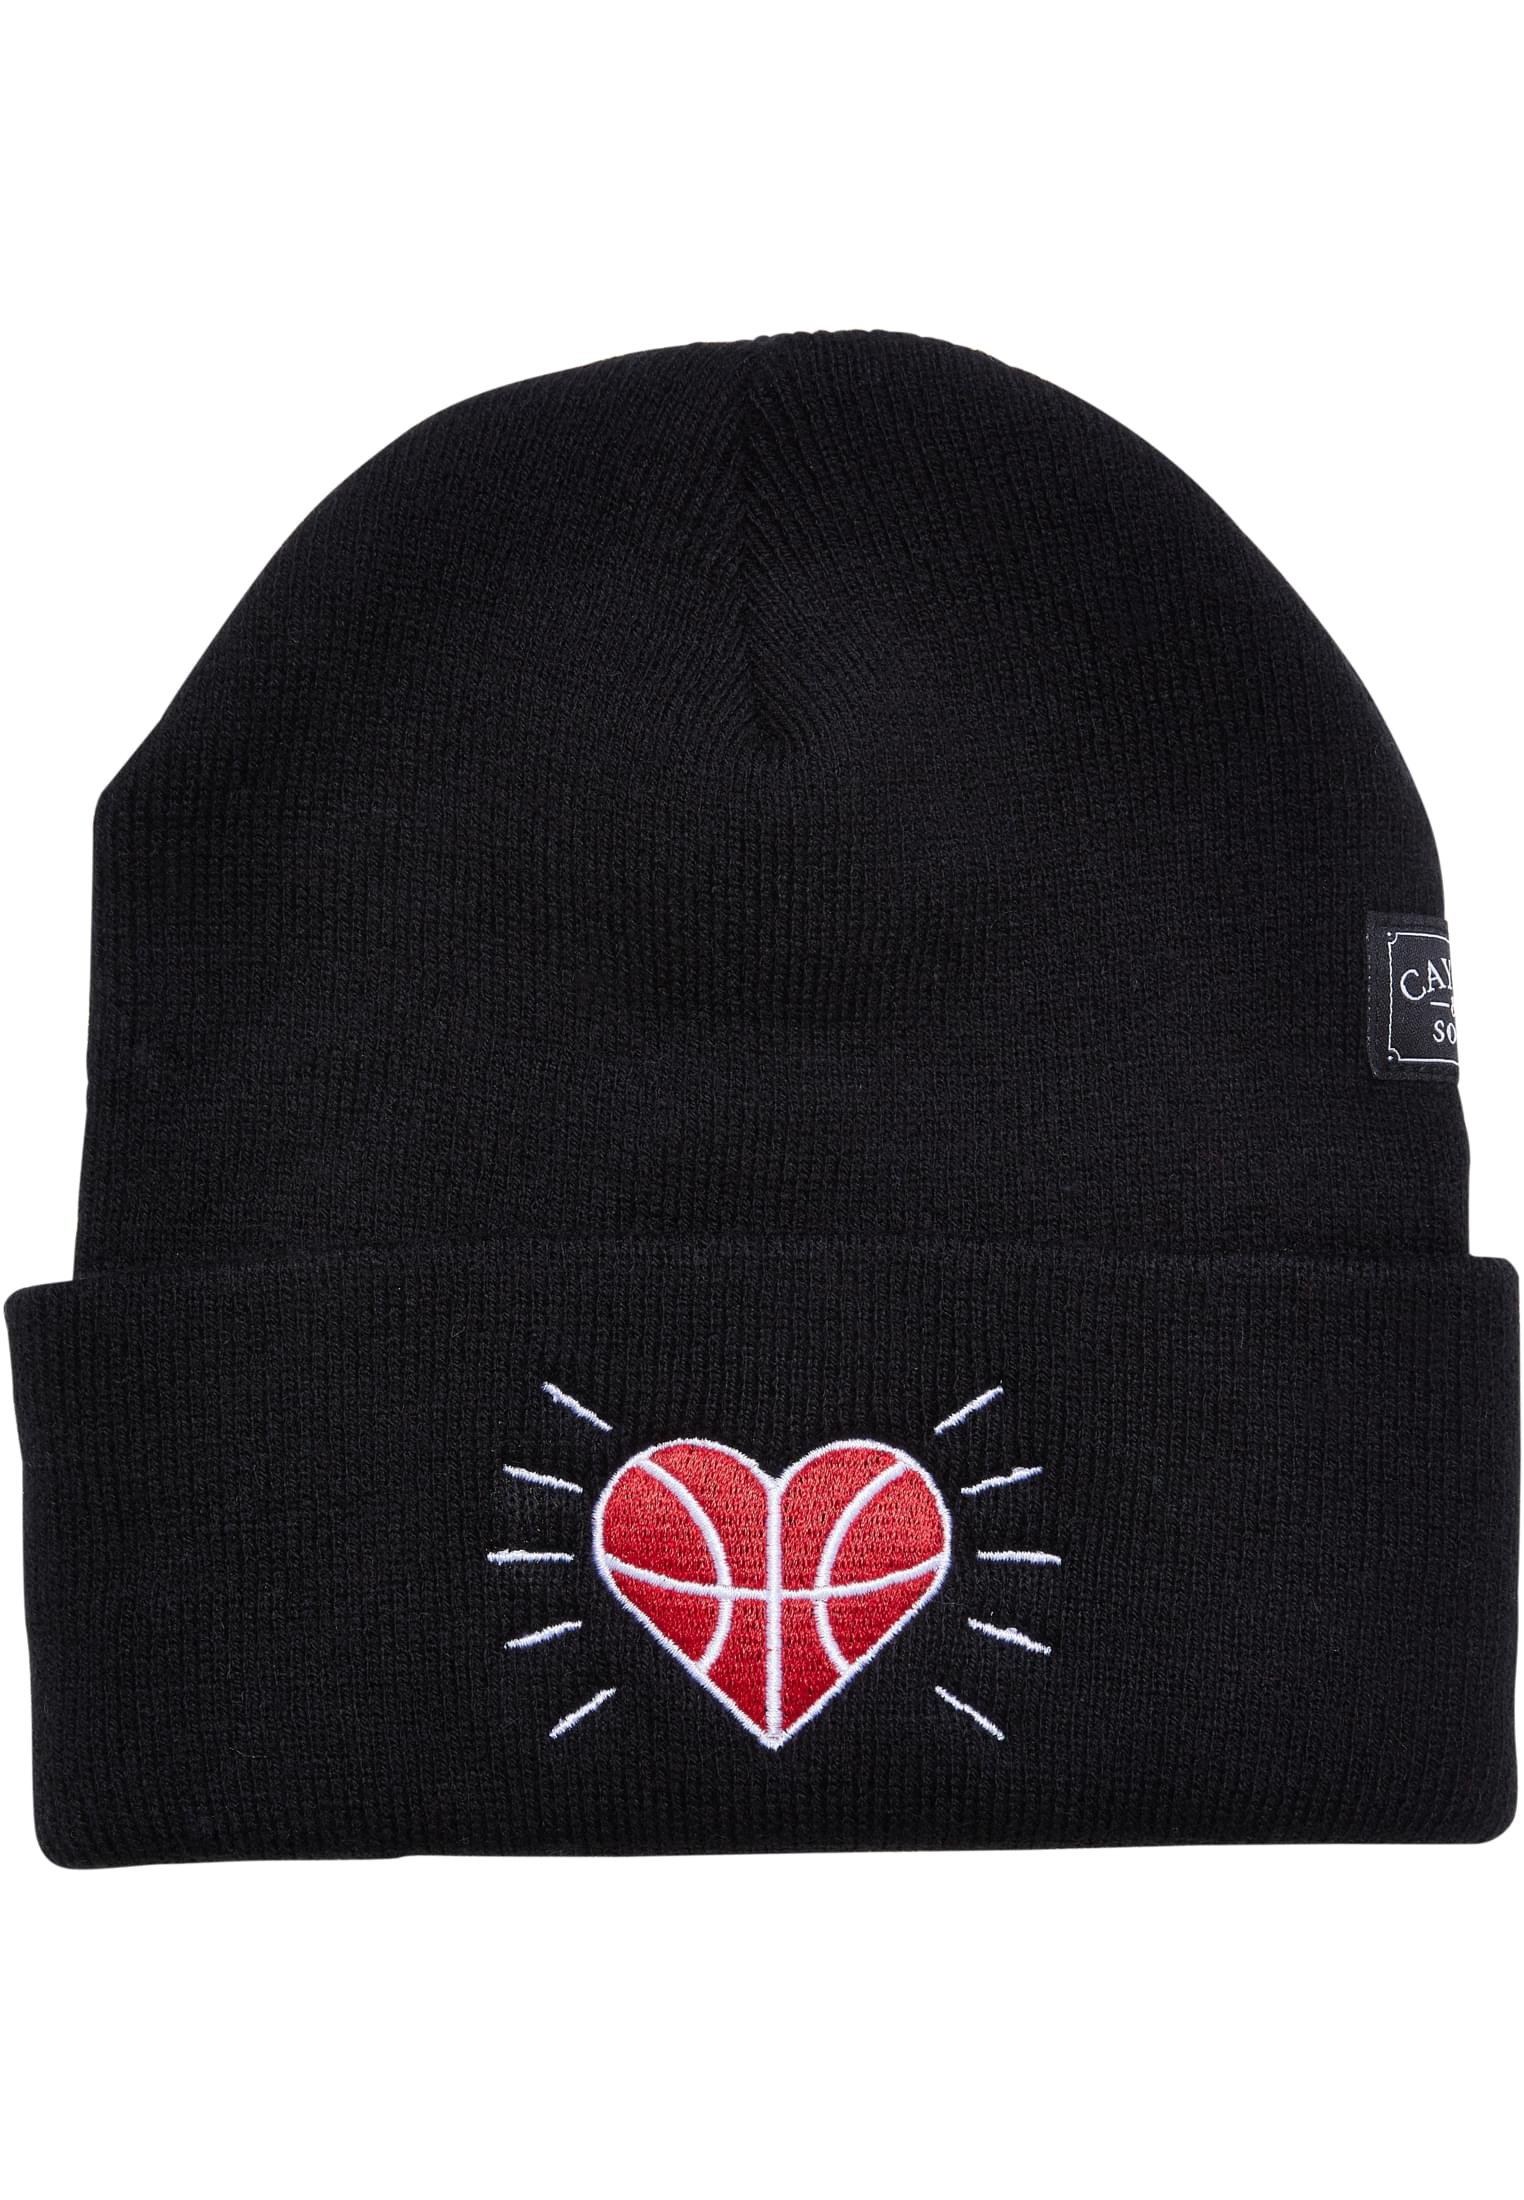 Heart for the Game Old School Beanie black/mc one size